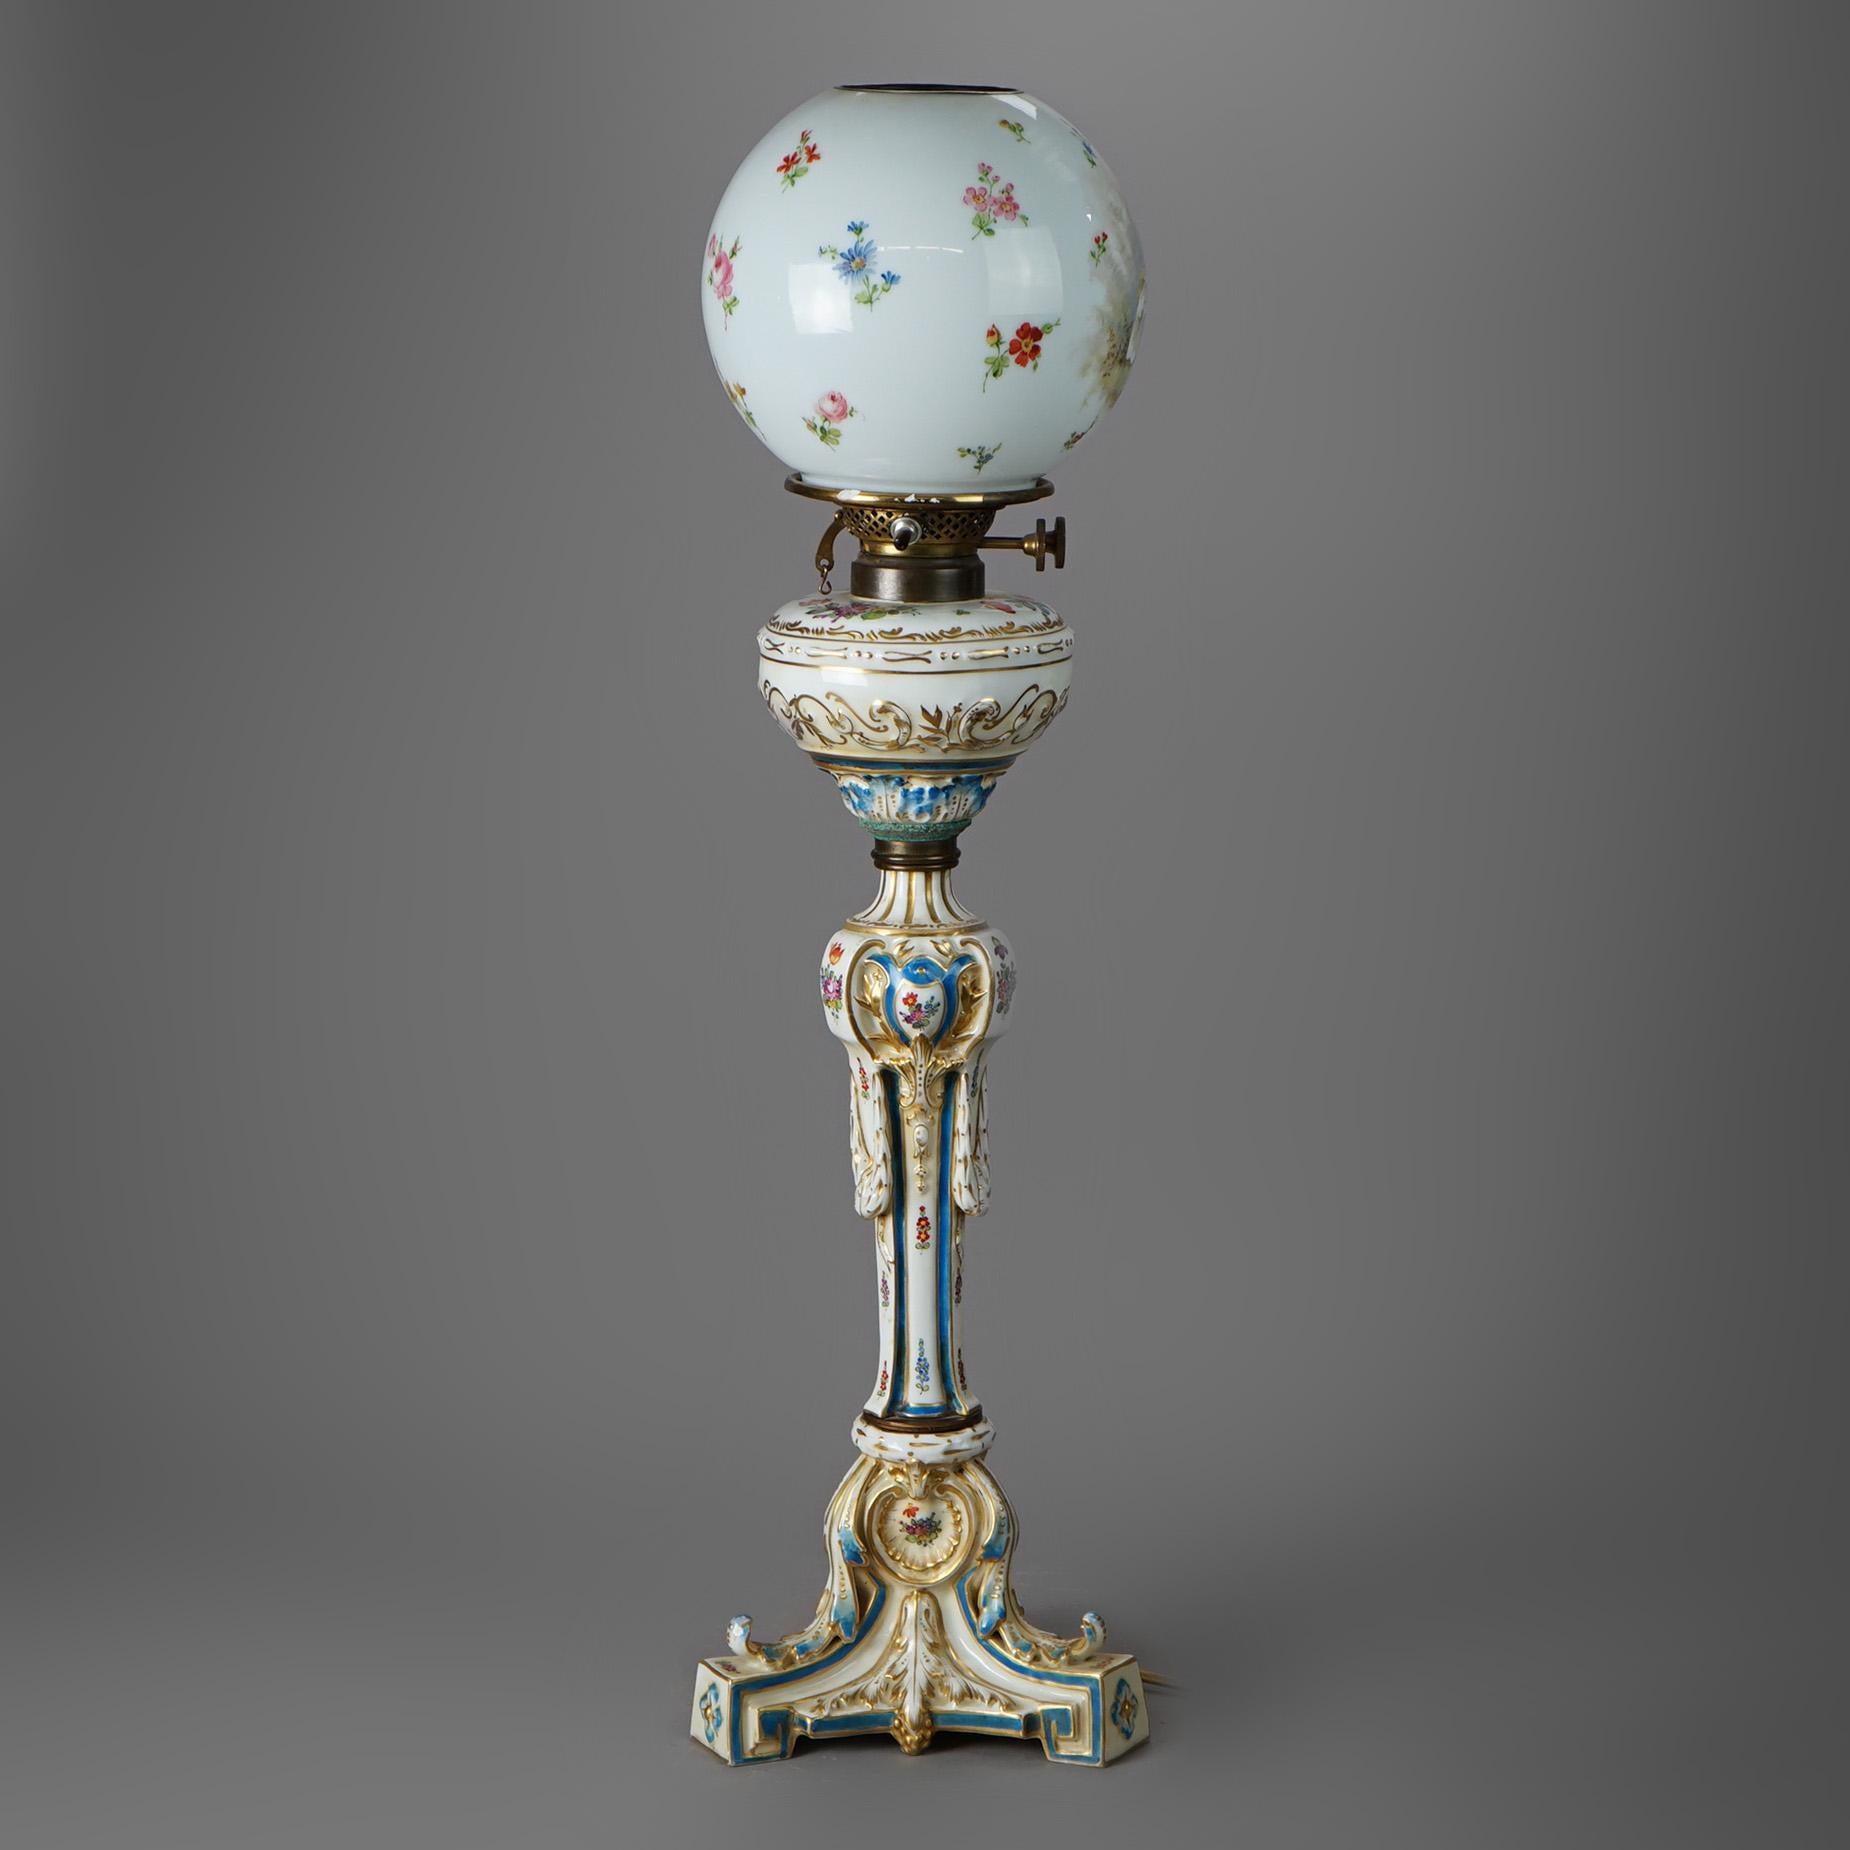 An antique Victorian Continental banquet lamp offers floral glass globe over porcelain base having hand painted flowers and gilt highlights, electrified, 19th century

Measures - 28.5